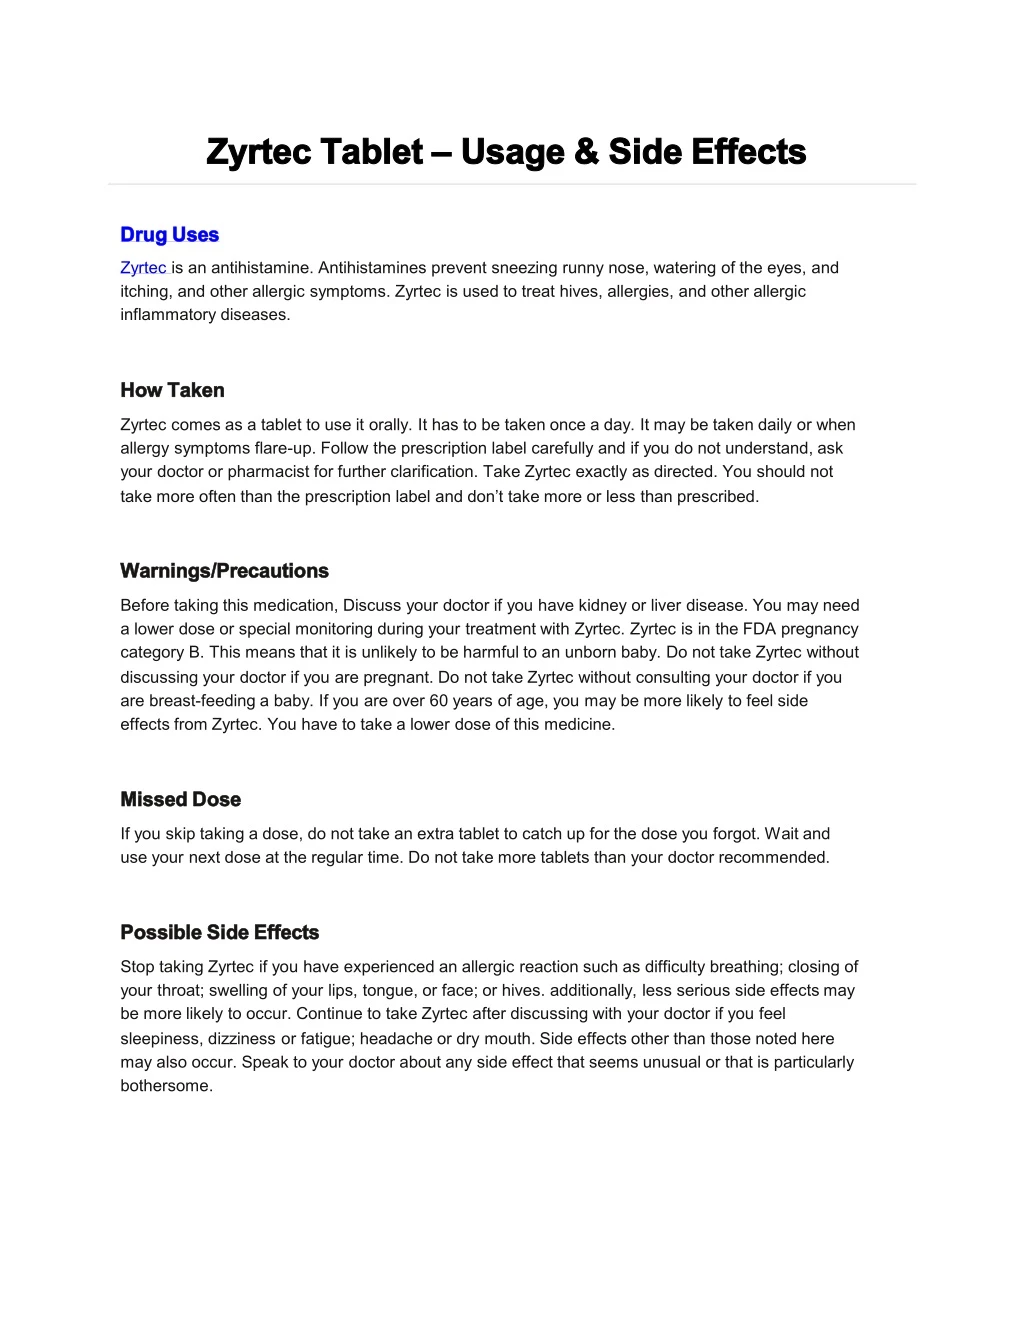 zyrtec tablet usage side effects